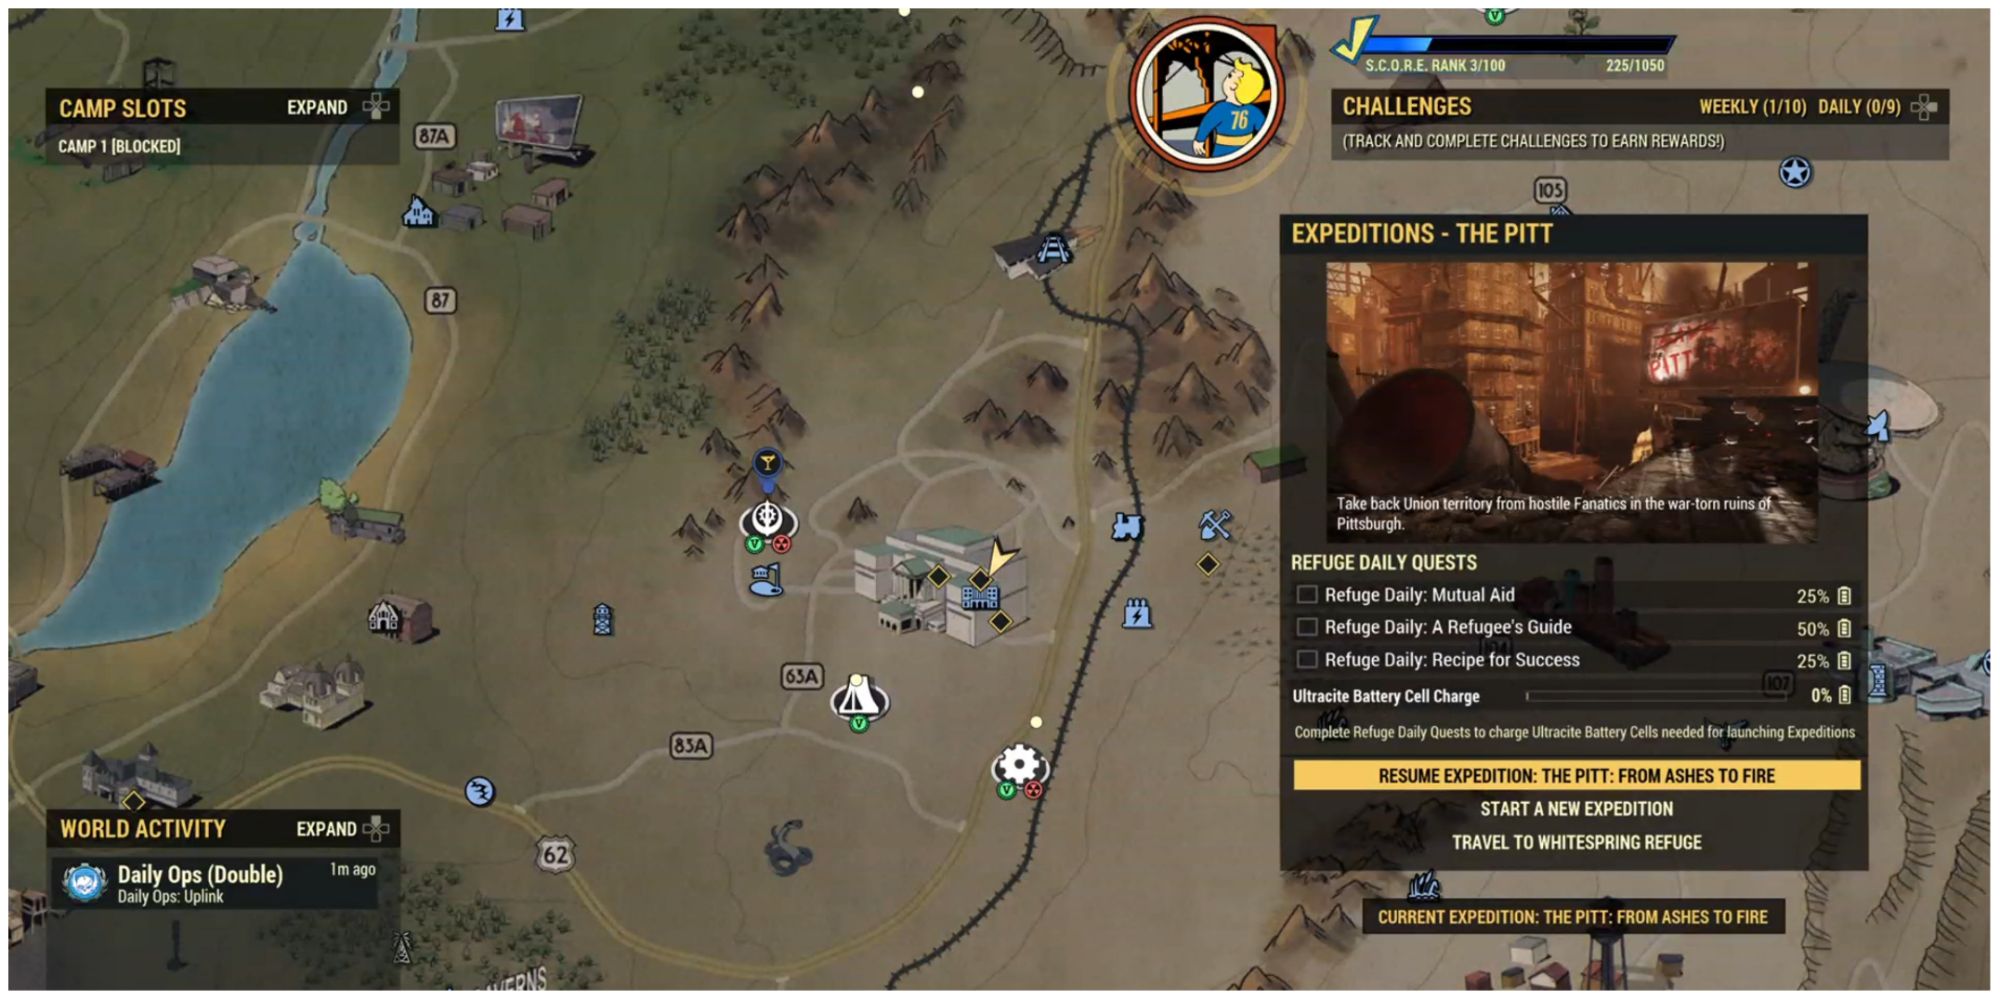 Fallout 76 map screen with Pitt expeditions submenu opened